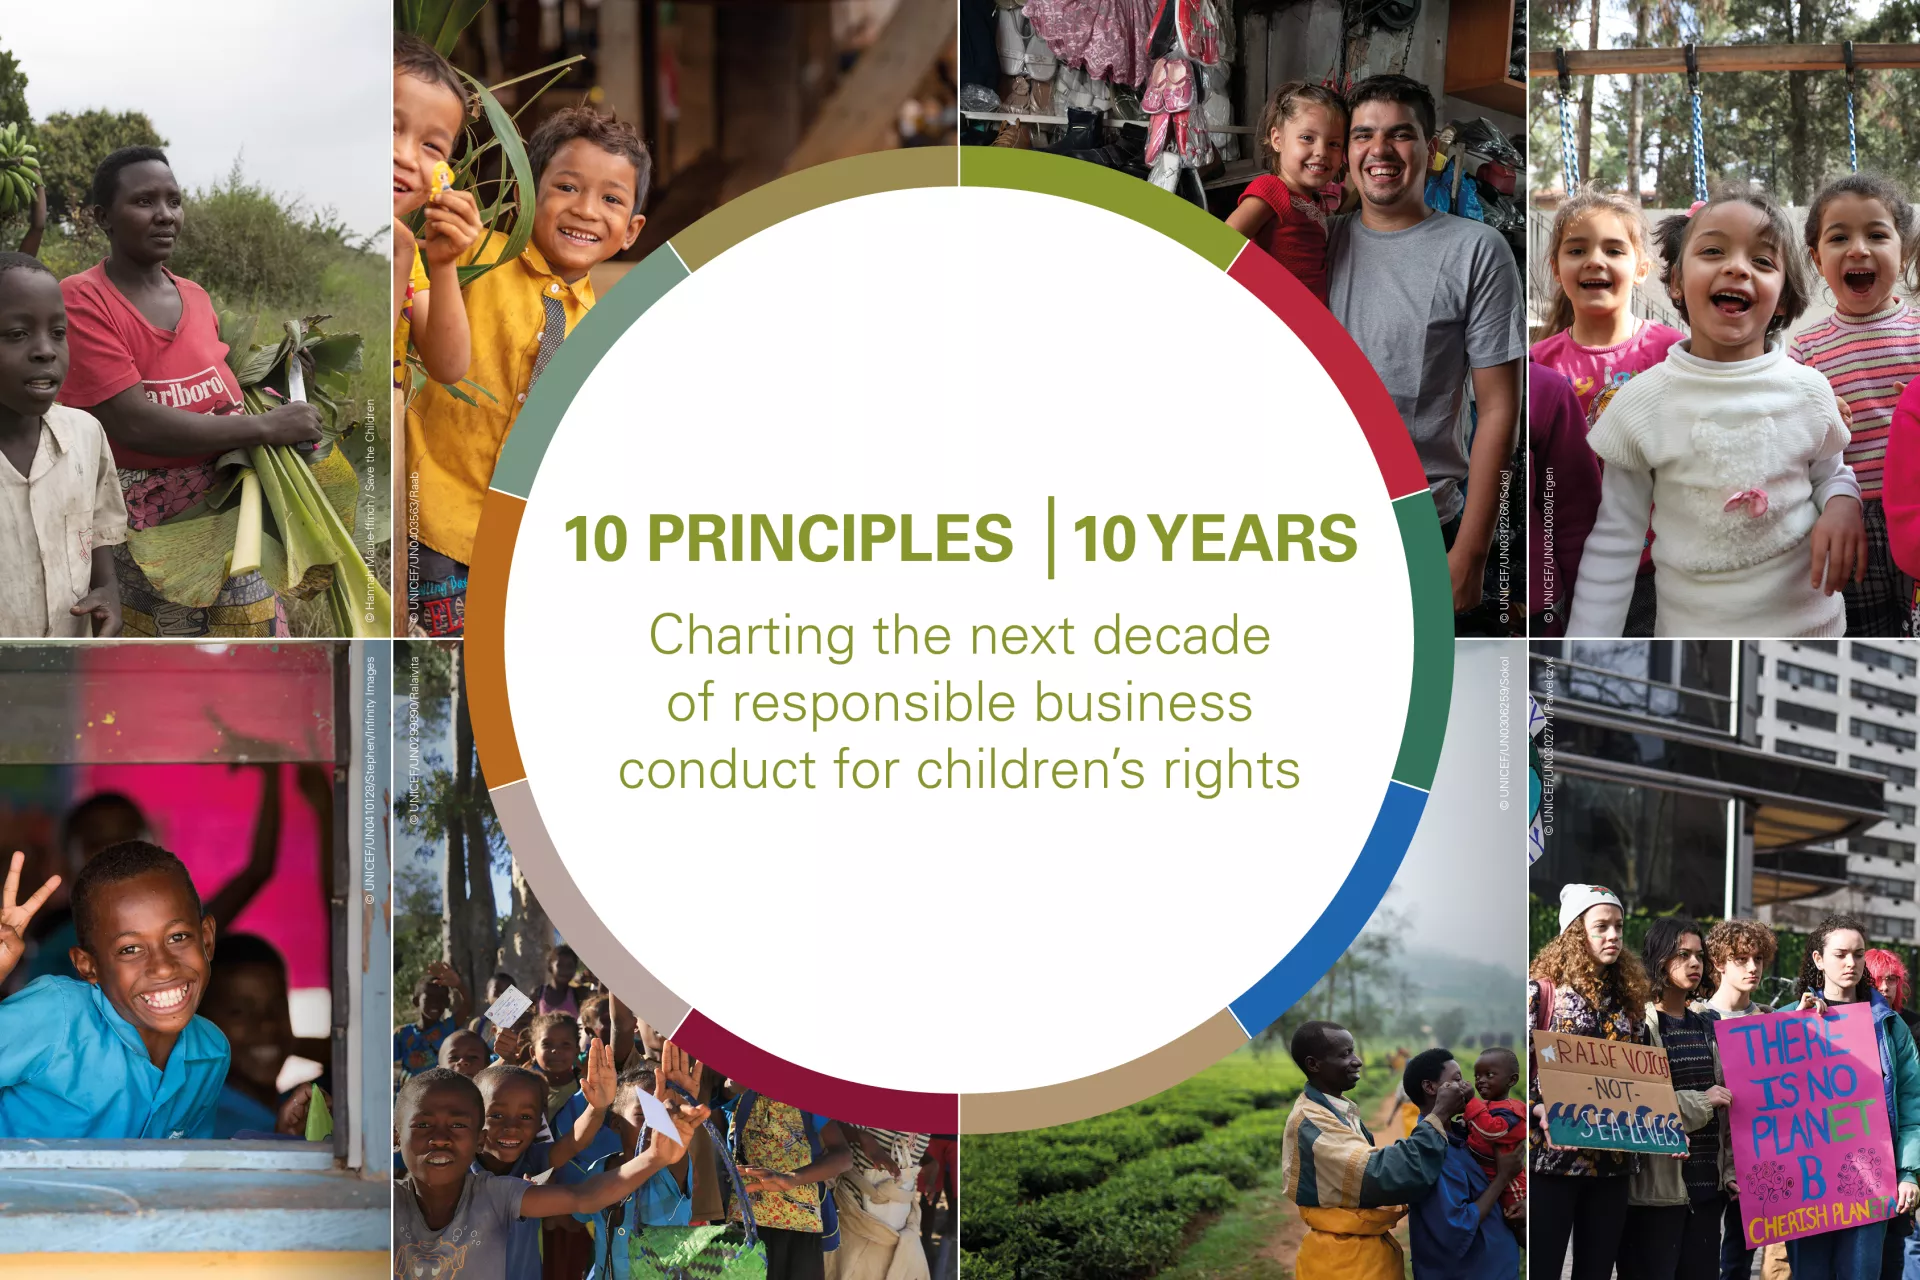 The 10th Anniversary of the Children’s Rights and Business Principles